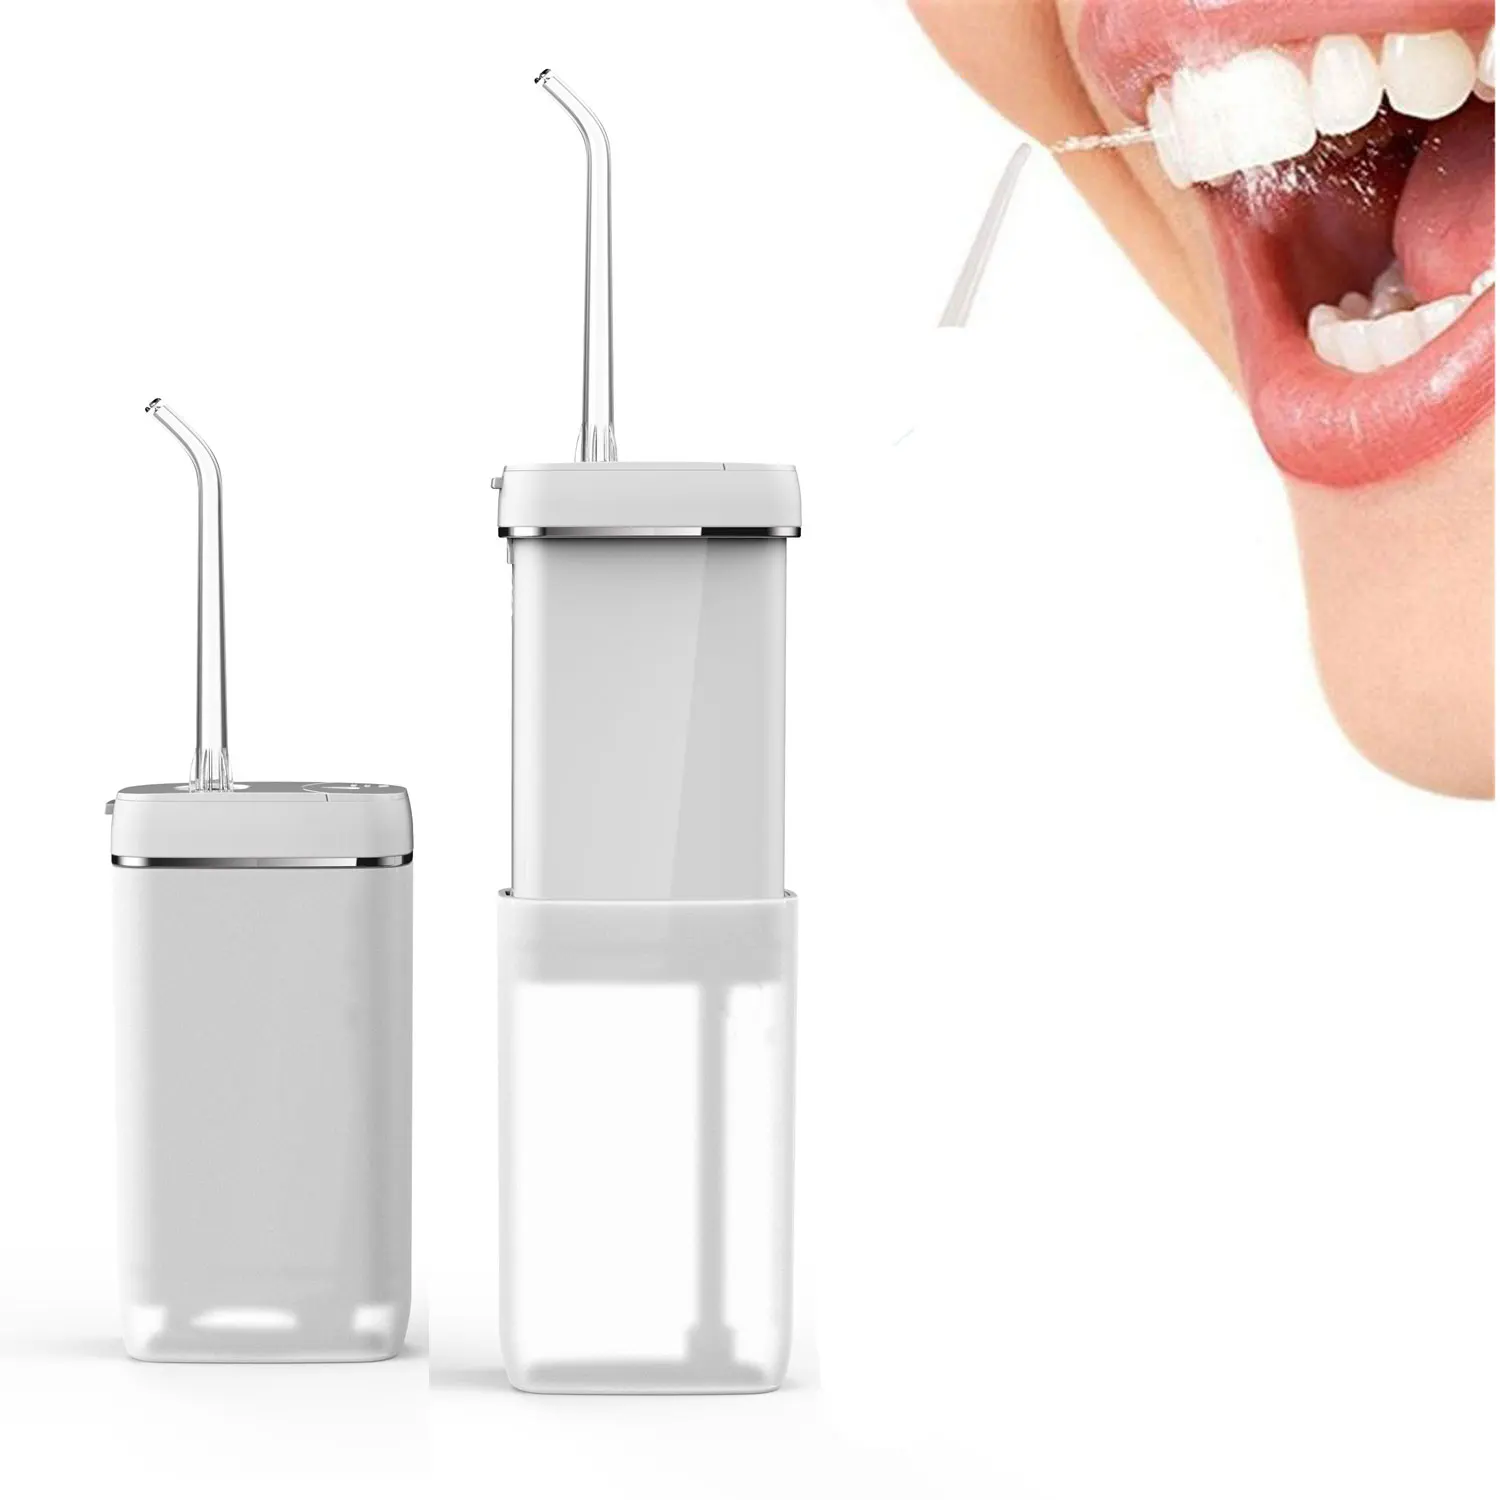 

Portable Cordless Dental Gum Oral Irrigator tooth whitening/teeth clean products oral irrigator/water flosser, White/pink/blue